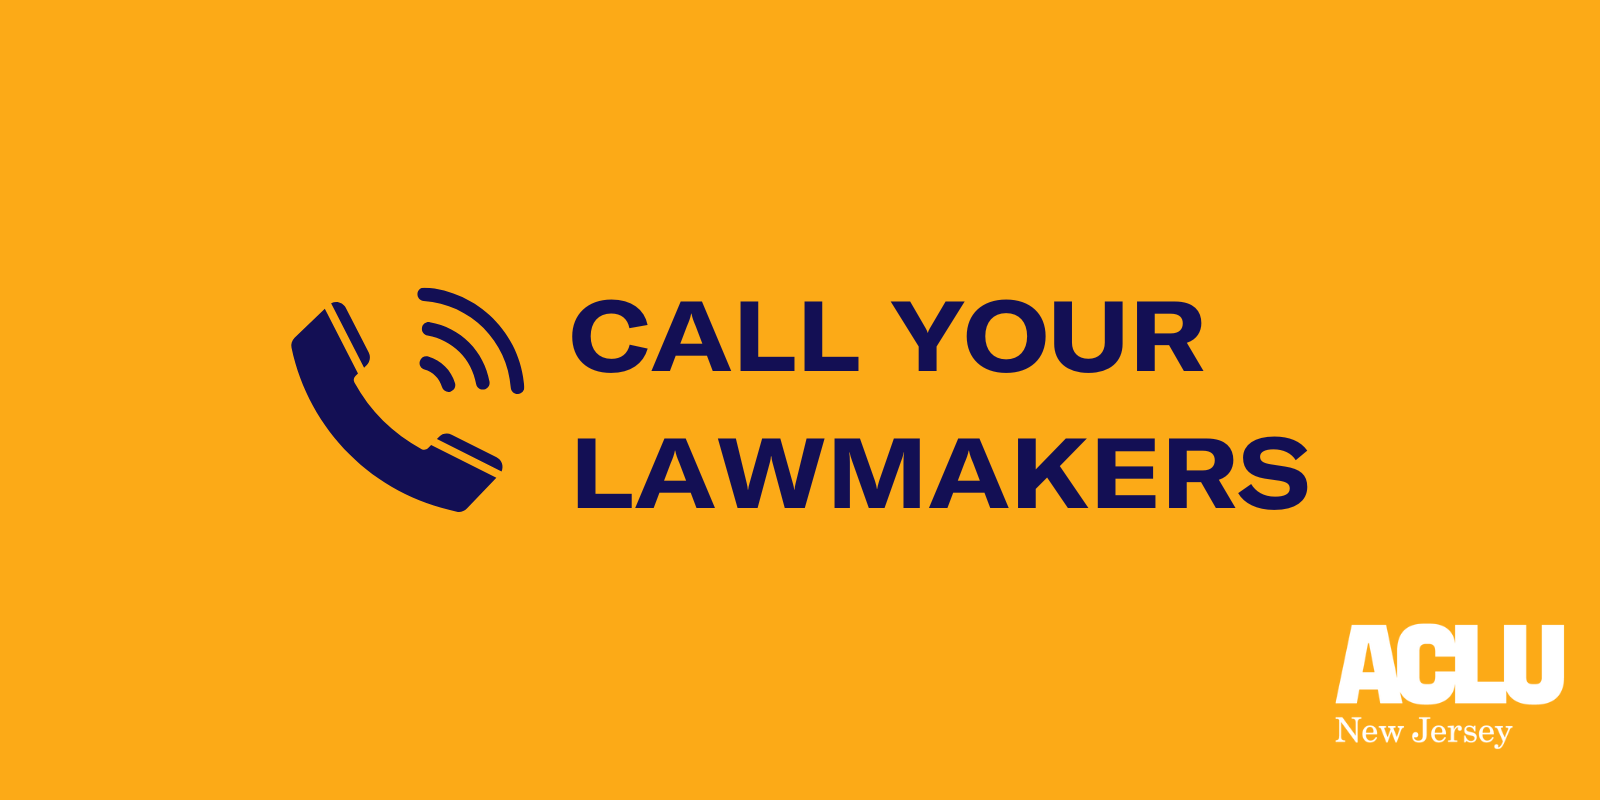 A graphic with a phone receiver with sound waves on the left and "call your lawmakers" on the right.